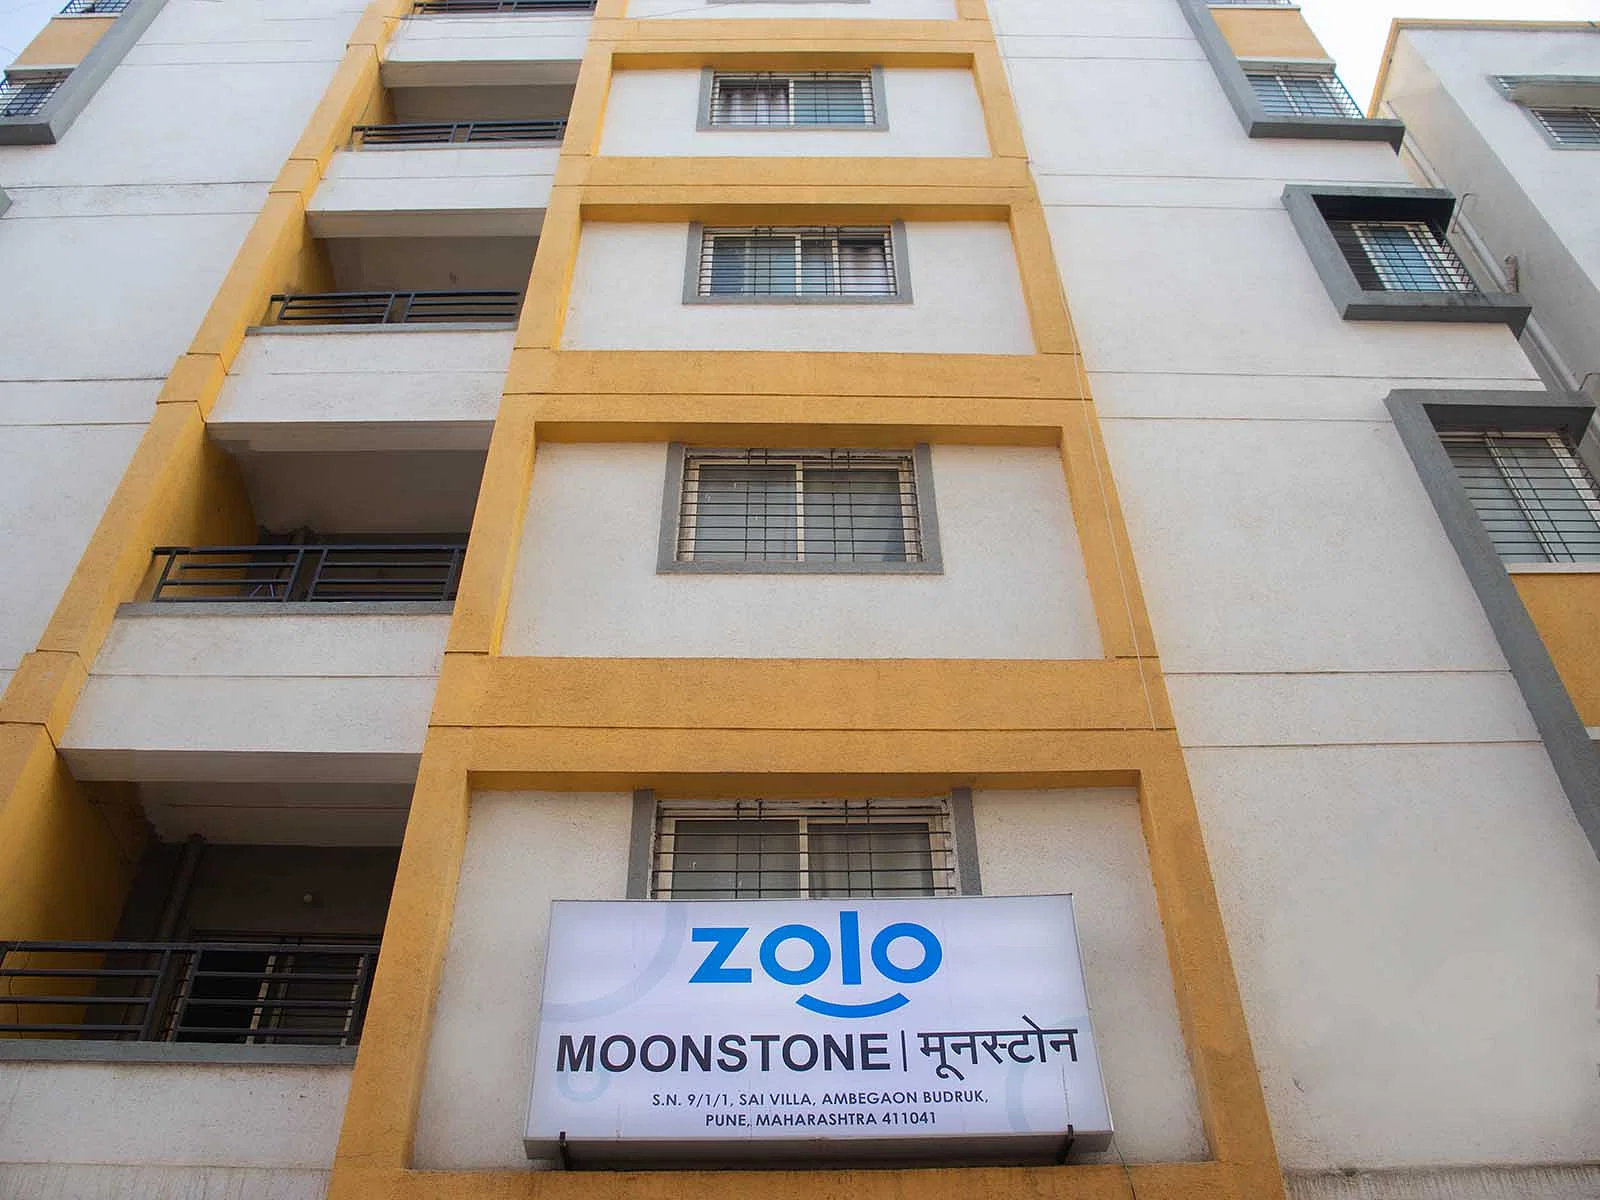 safe and affordable hostels for ladies students with 24/7 security and CCTV surveillance-Zolo Moonstone